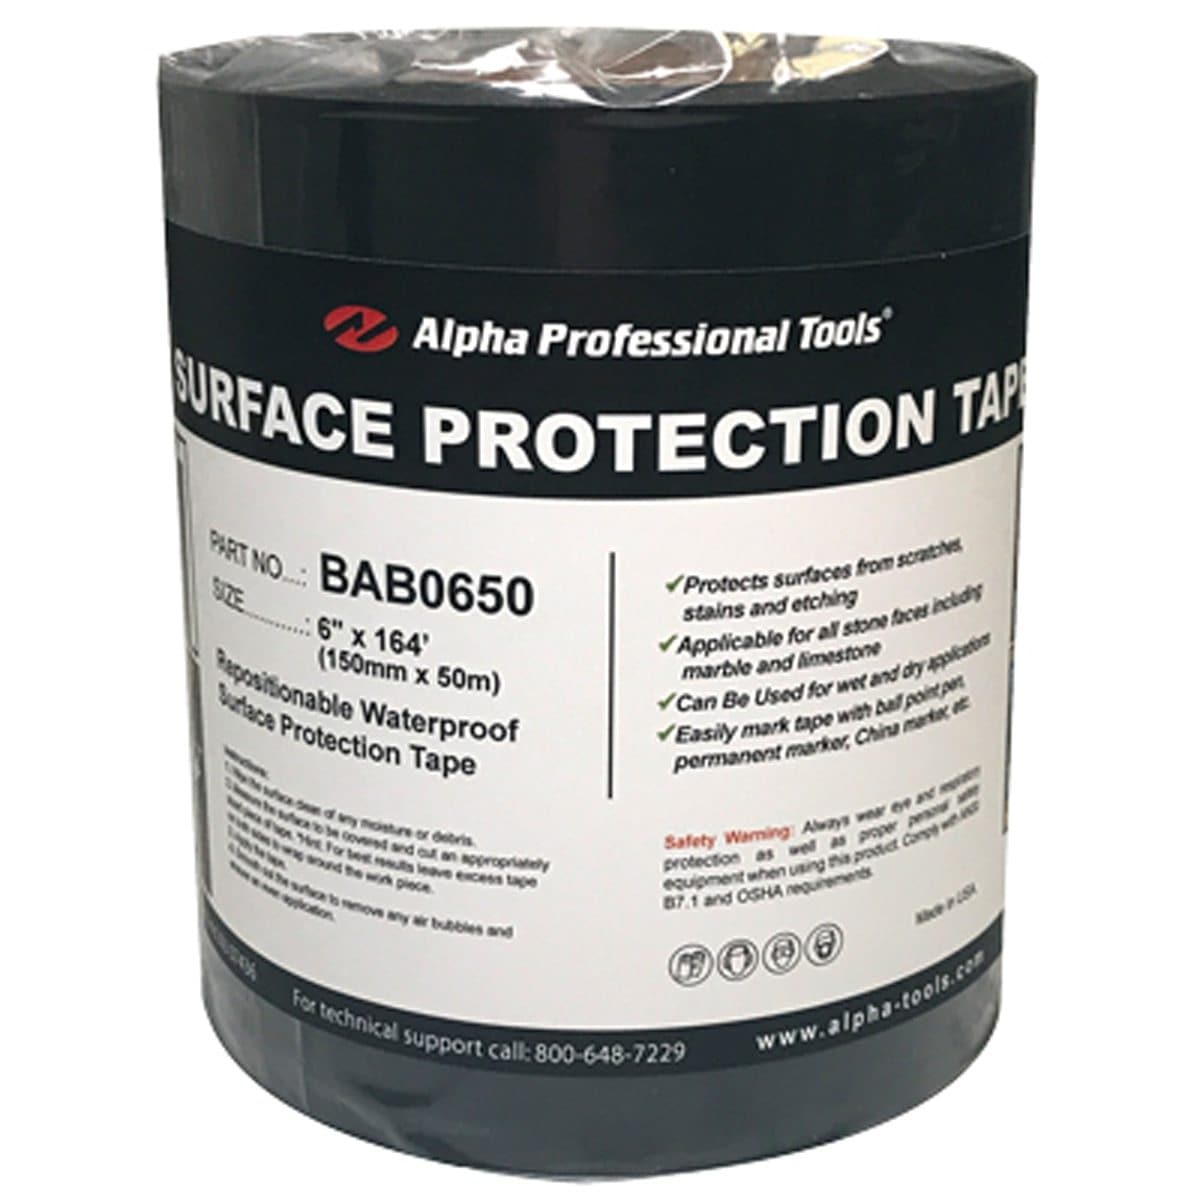 Reposition-able Waterproof Surface Protection Tape - Alpha Tools